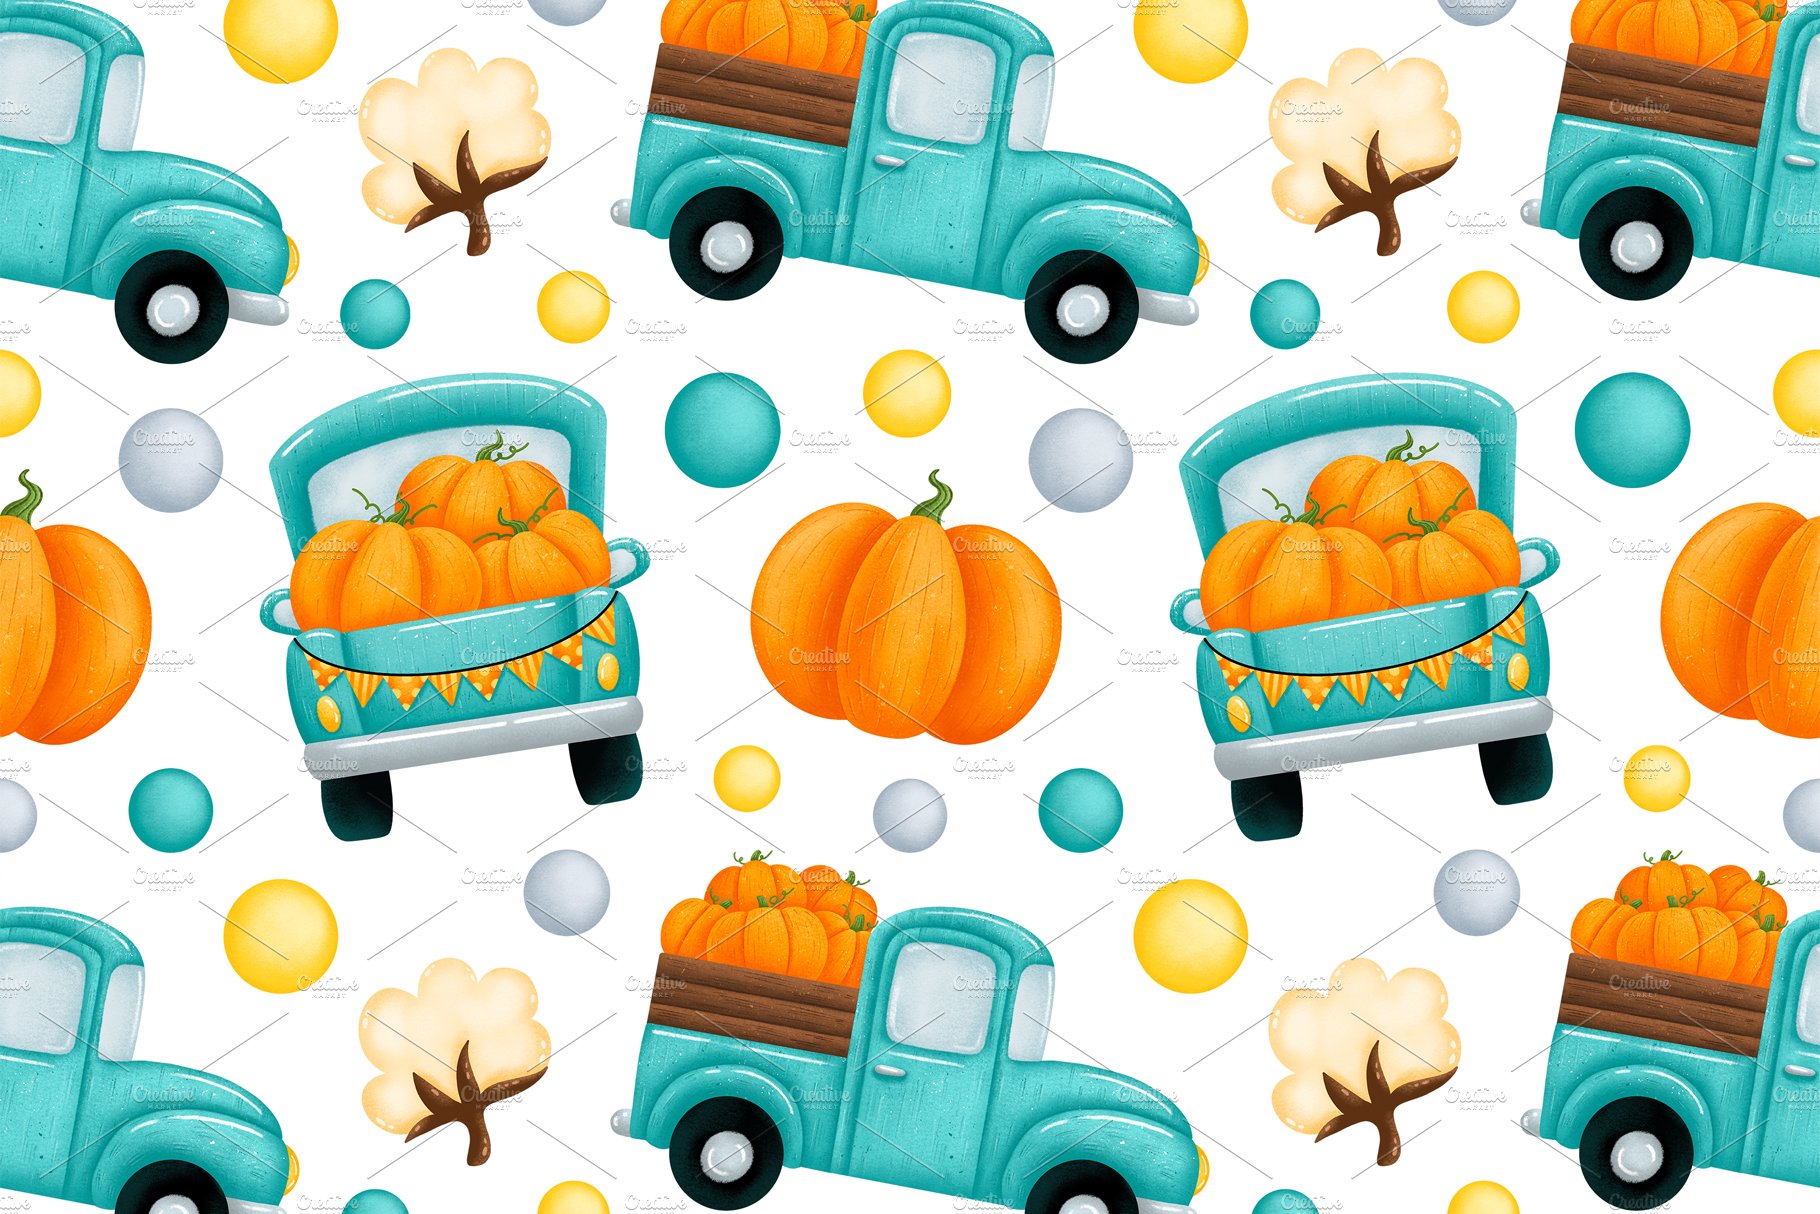 Turquoise trucks with pumpkins.